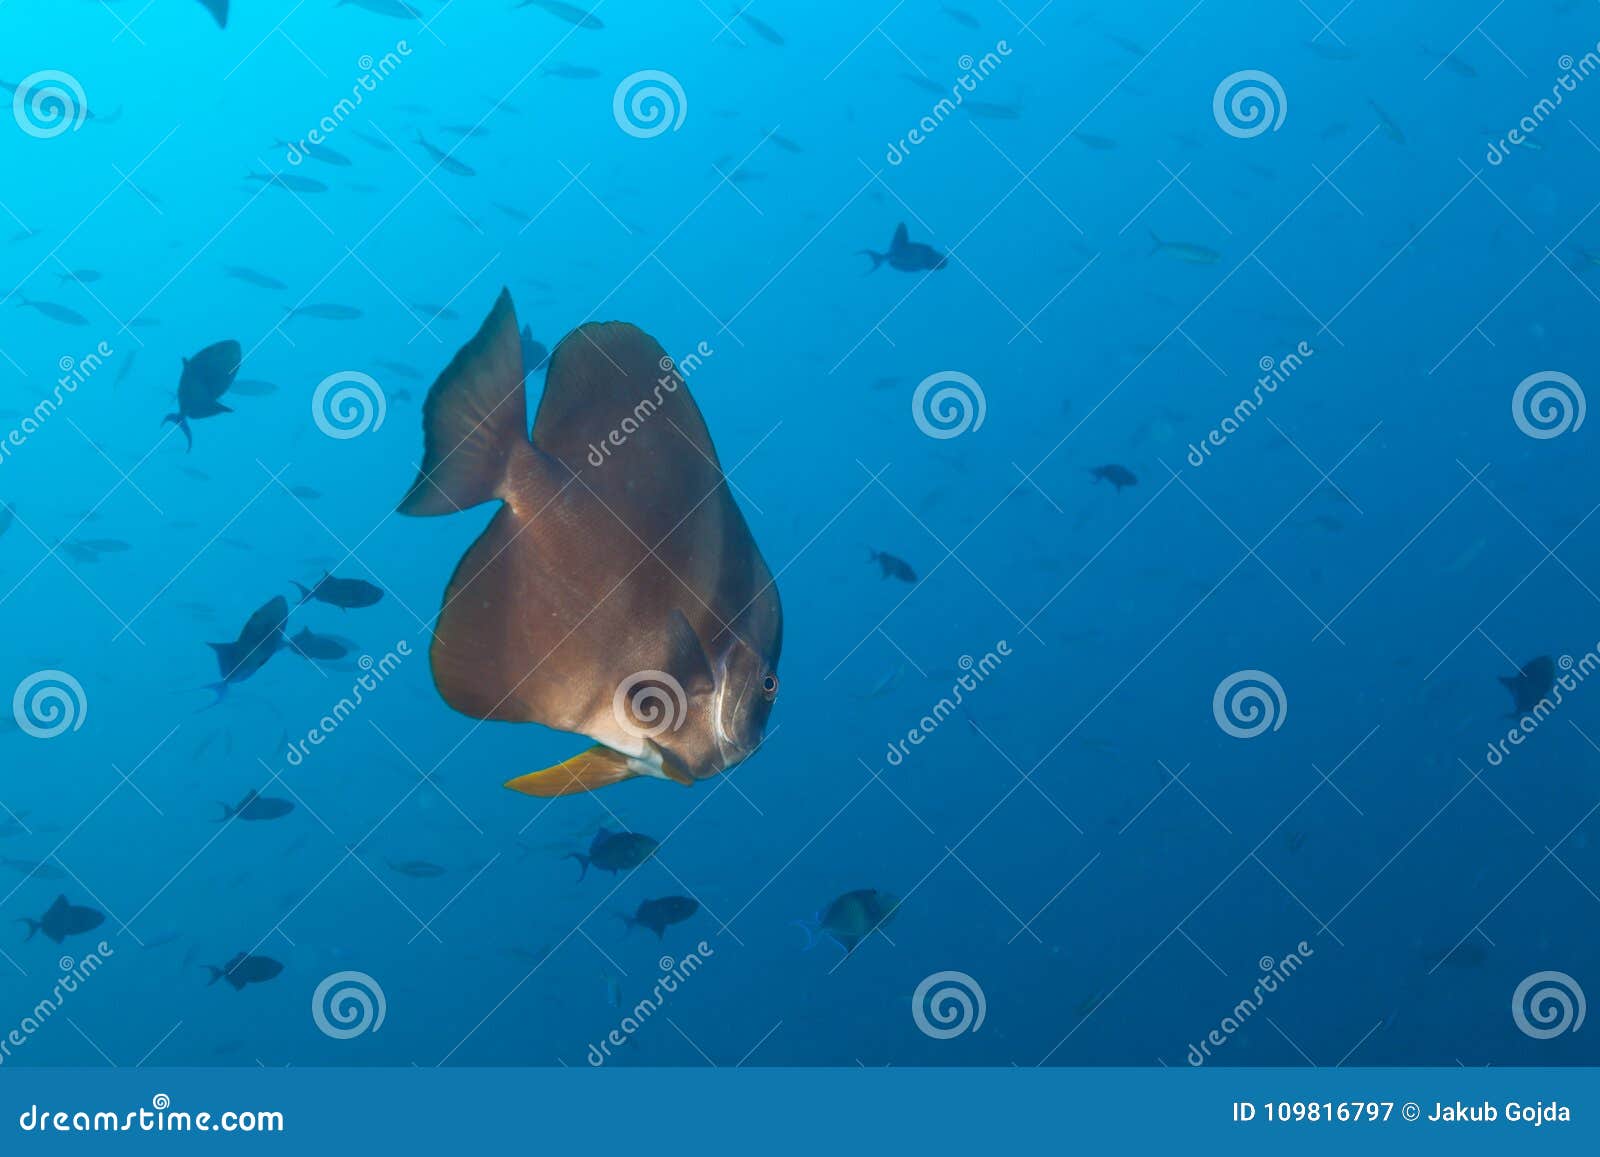 Big Flat Fish in Indian Ocean Stock Image - Image of conservation, barrier:  109816797